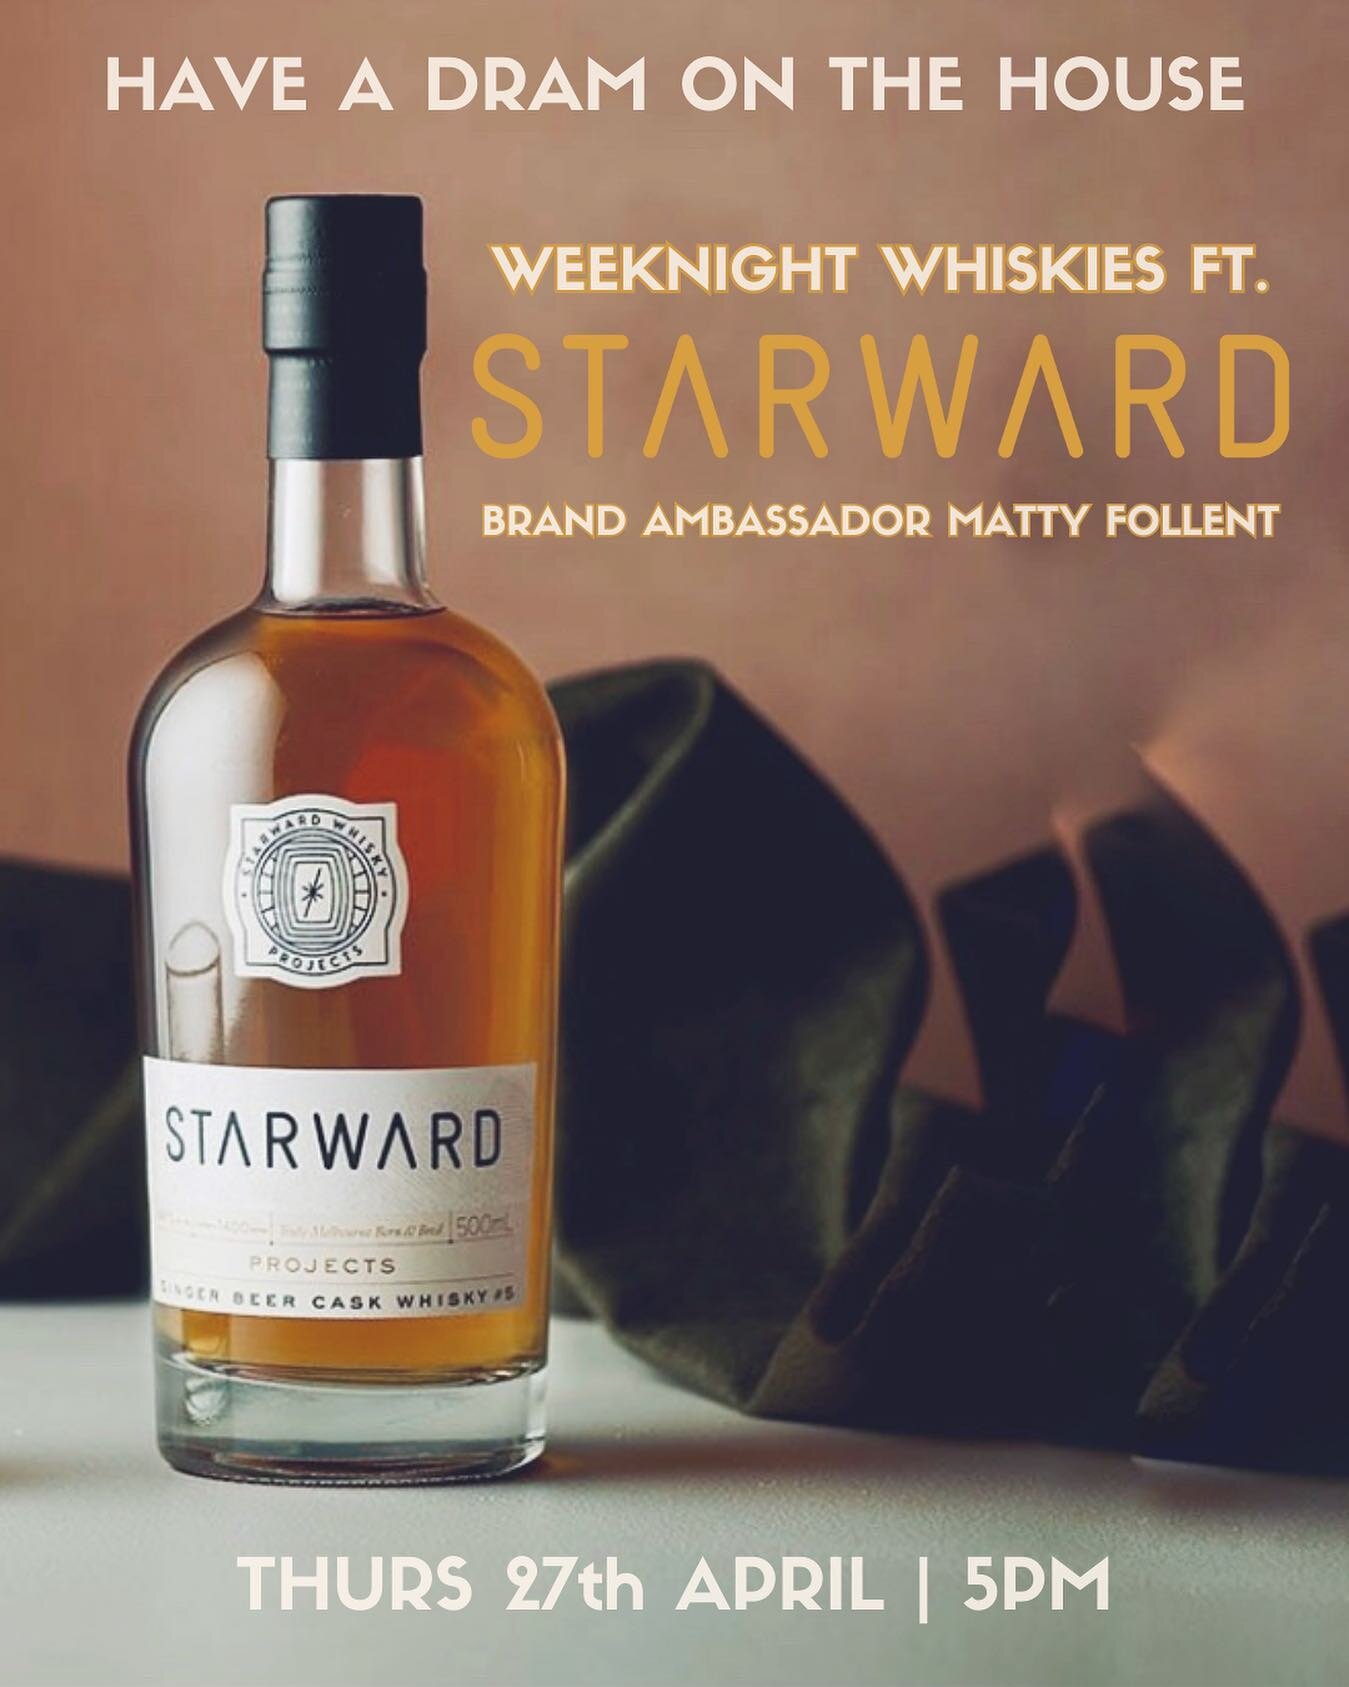 Come on down to Foxtrot Unicorn for a coupla' cheeky midweek drams, courtesy of our good friends at Starward Whisky, the World's Most Awarded Distillery at the iconic San Francisco World Spirit Competition 2022.

Brand Ambassador Matty Follent will b